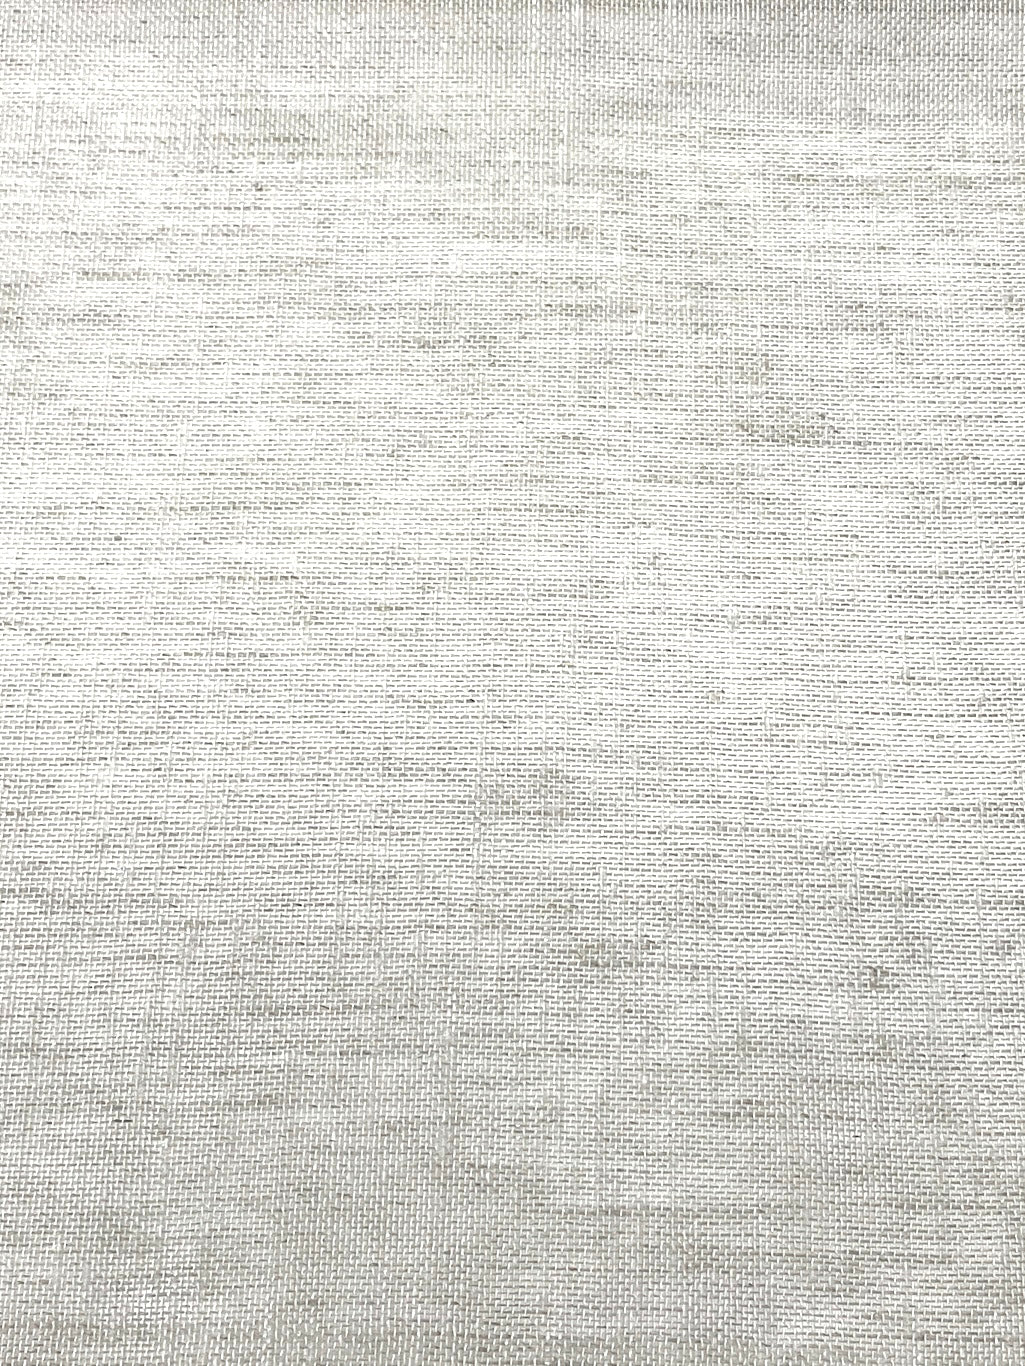 Texture Poly Sheer Linen Fabric By The Yard, White, Ivory, Oatmeal,Curtain, Drapery, Table Top, 57" Width/CL1099